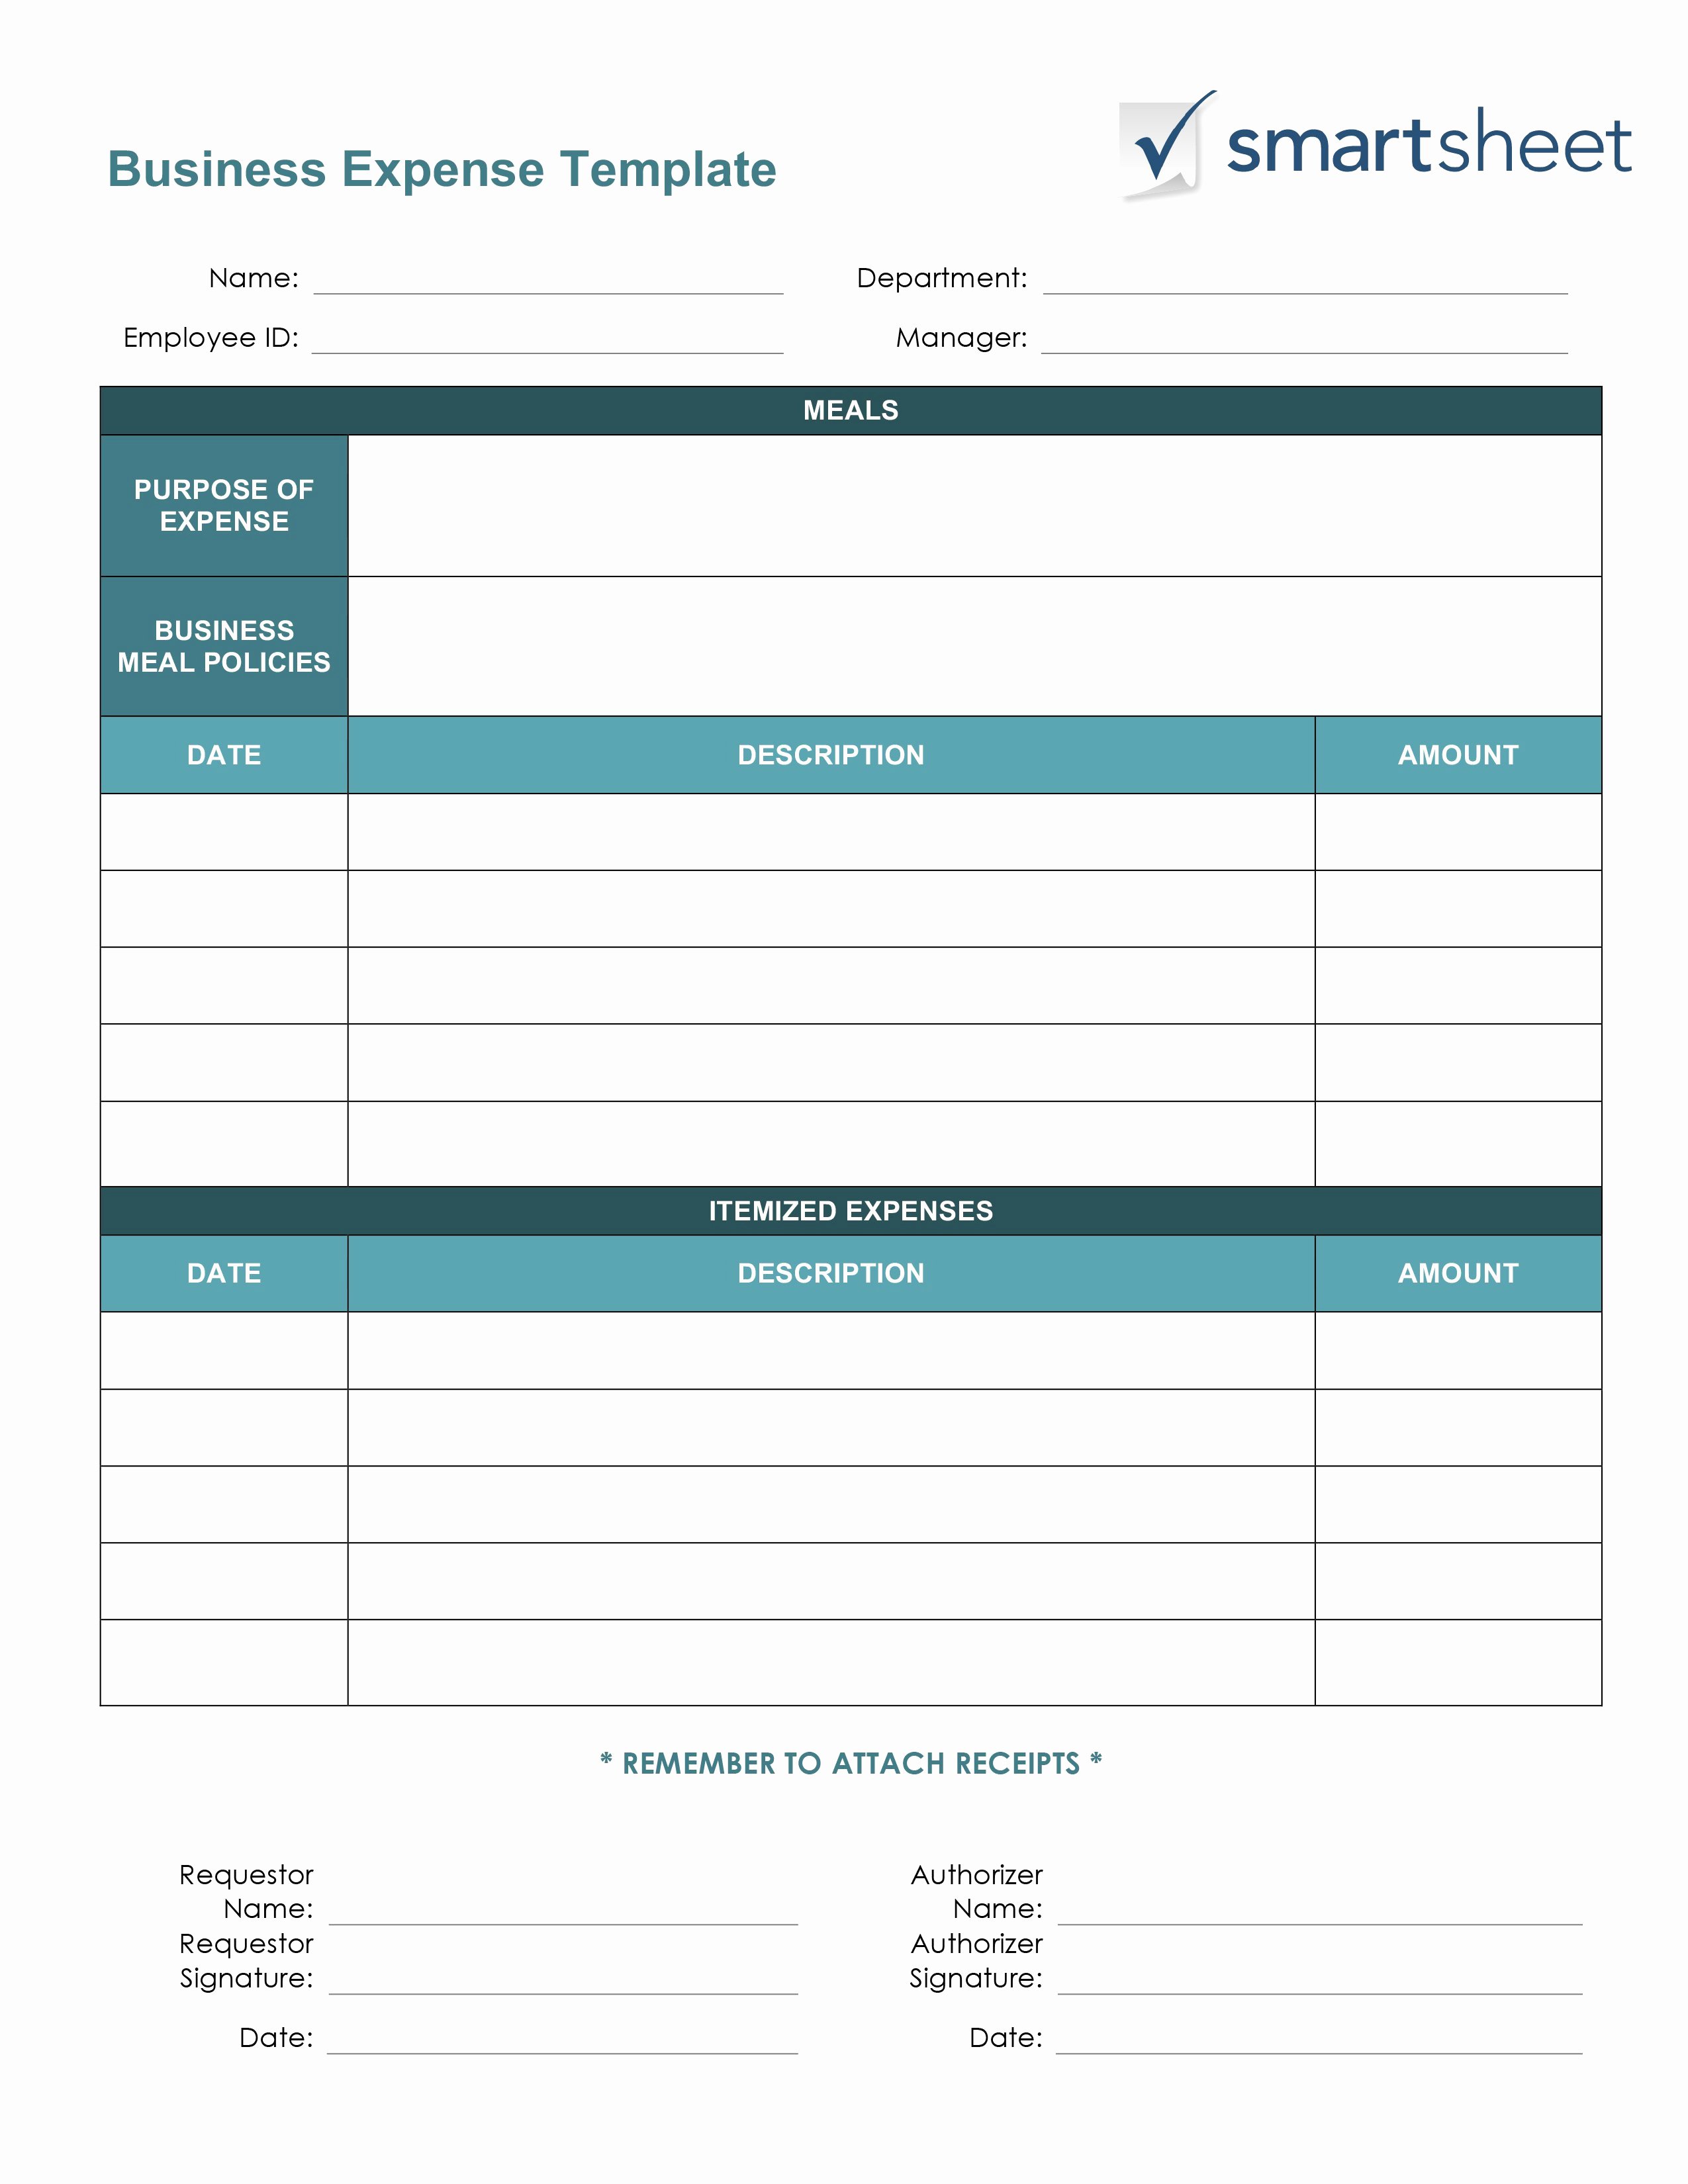 Free Expense Report Template Awesome Free Expense Report Templates Smartsheet